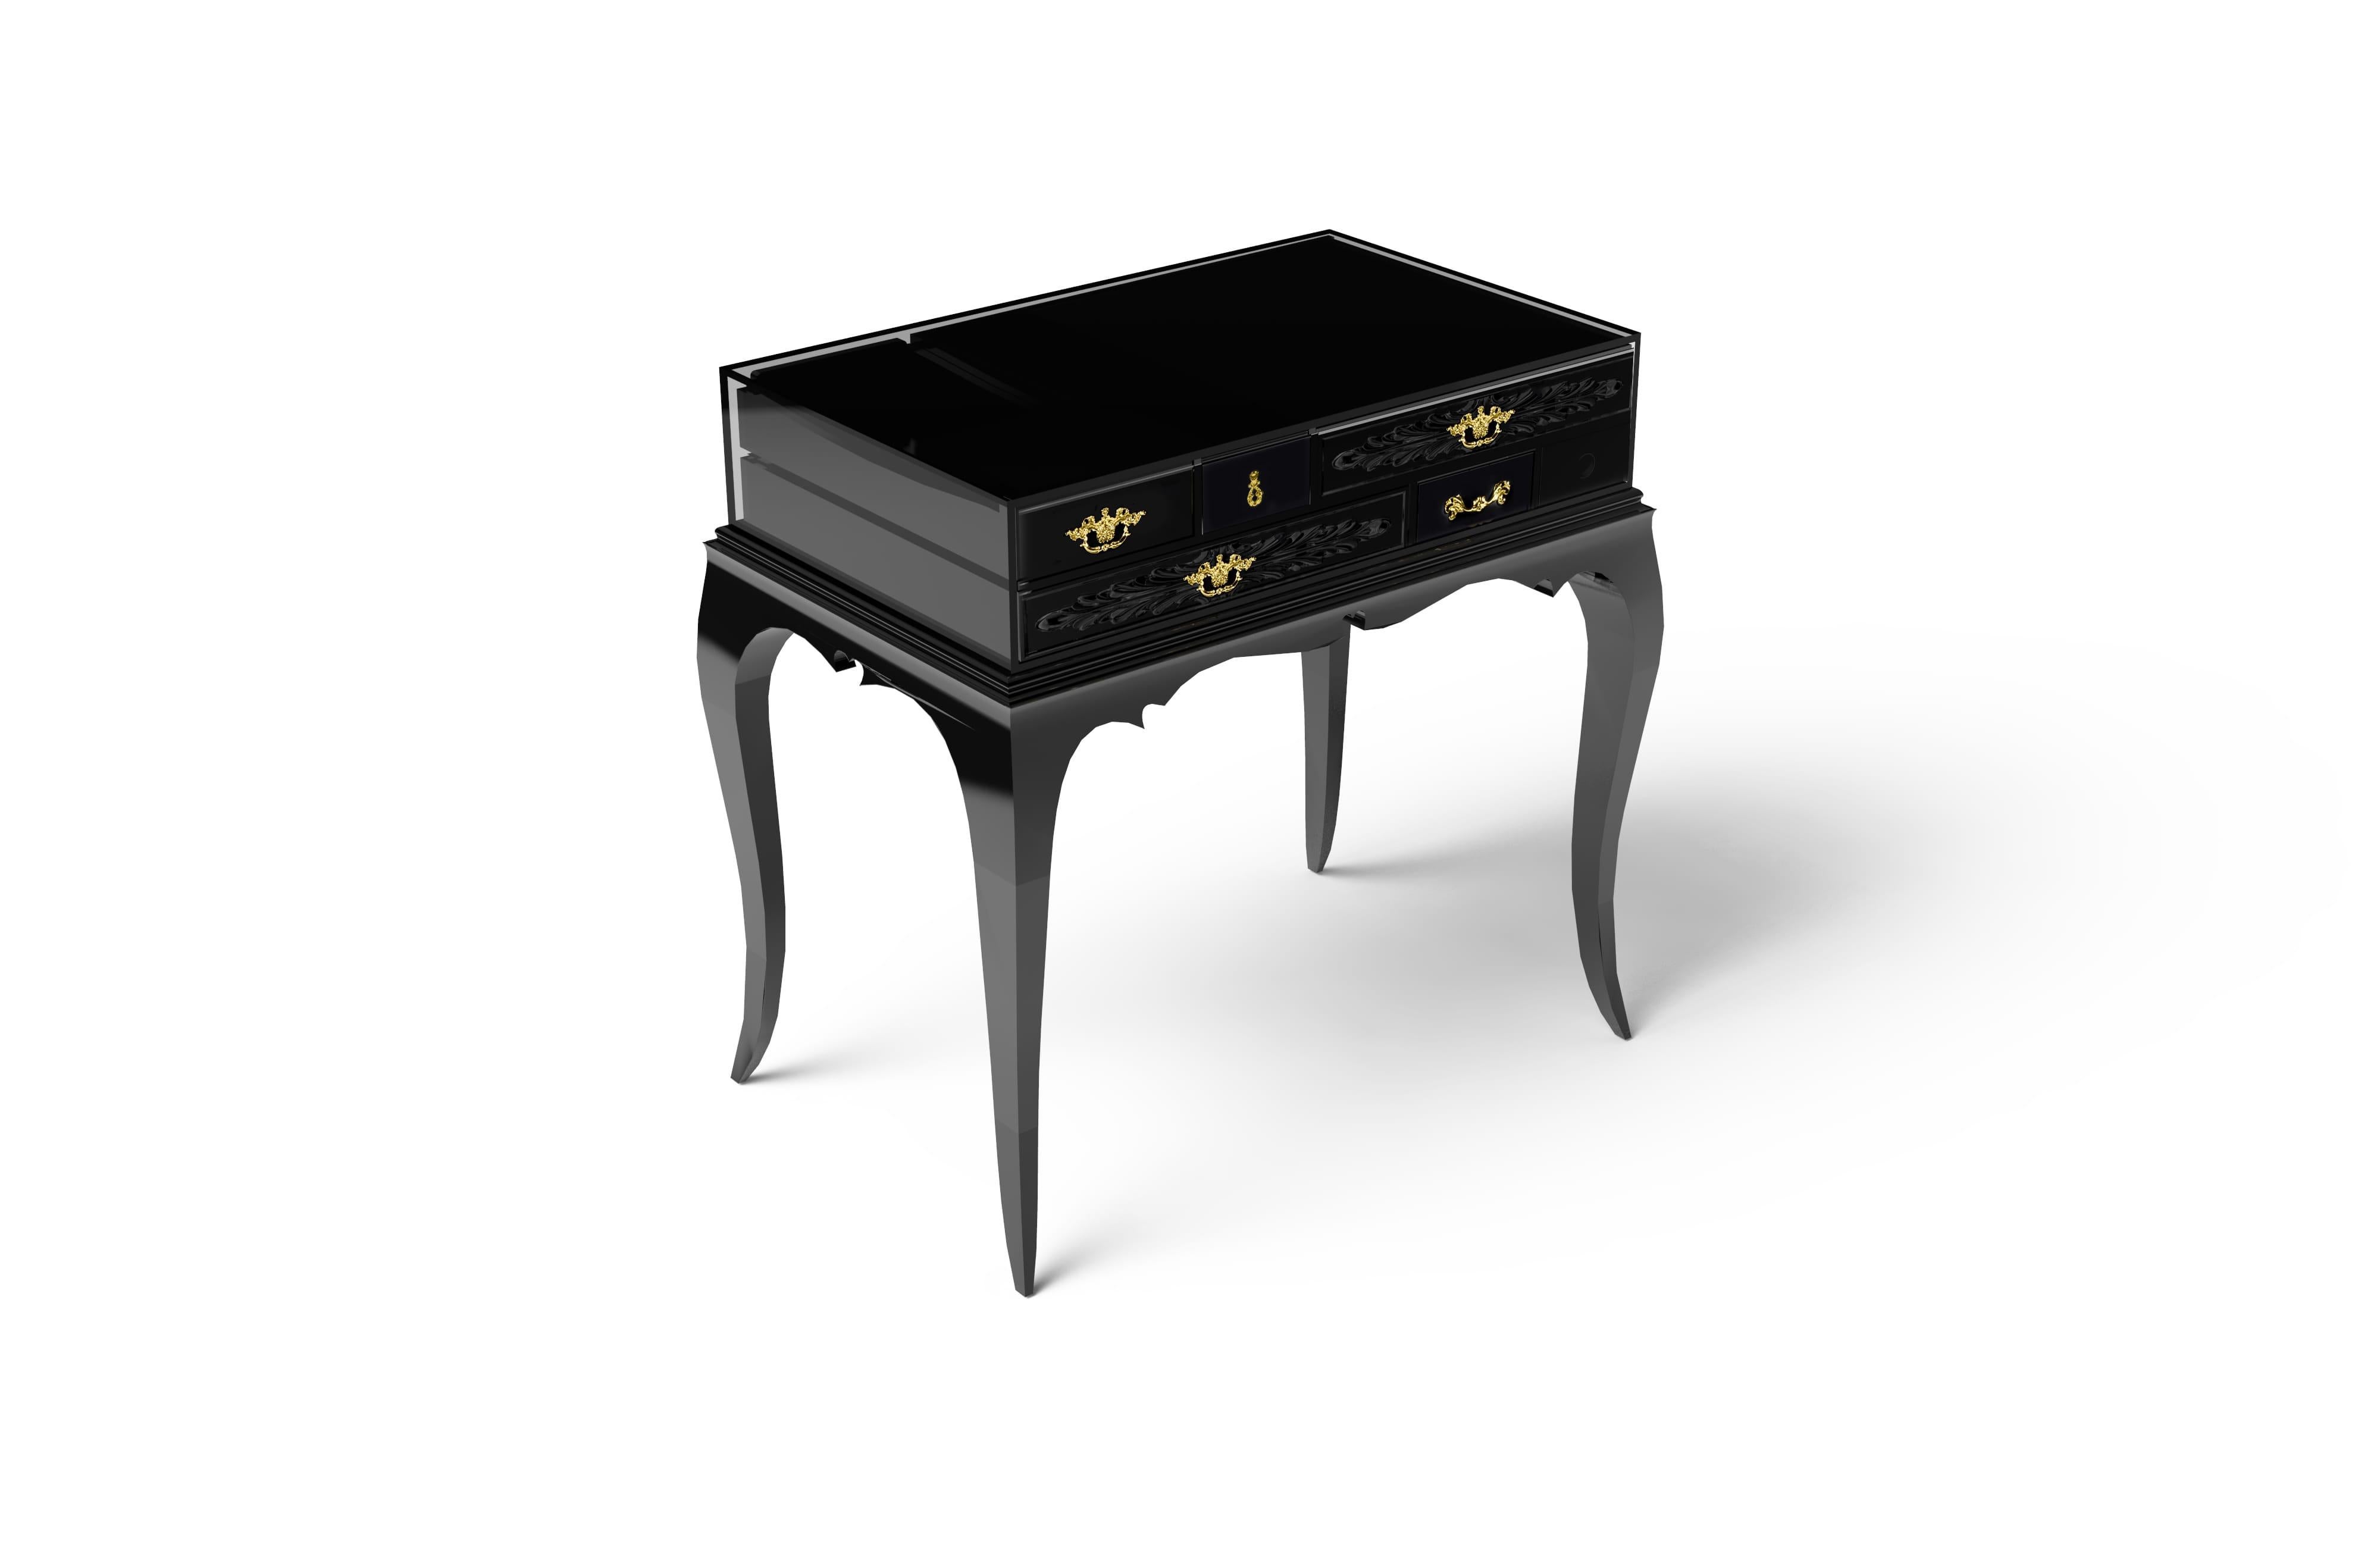 With seductive lines and impeccable detailed work, the Melrose nightstand stands as a reference within Boca do Lobo’s master bedroom collection. Combining the best elements from various design styles and aesthetics, this luxurious nightstand brings